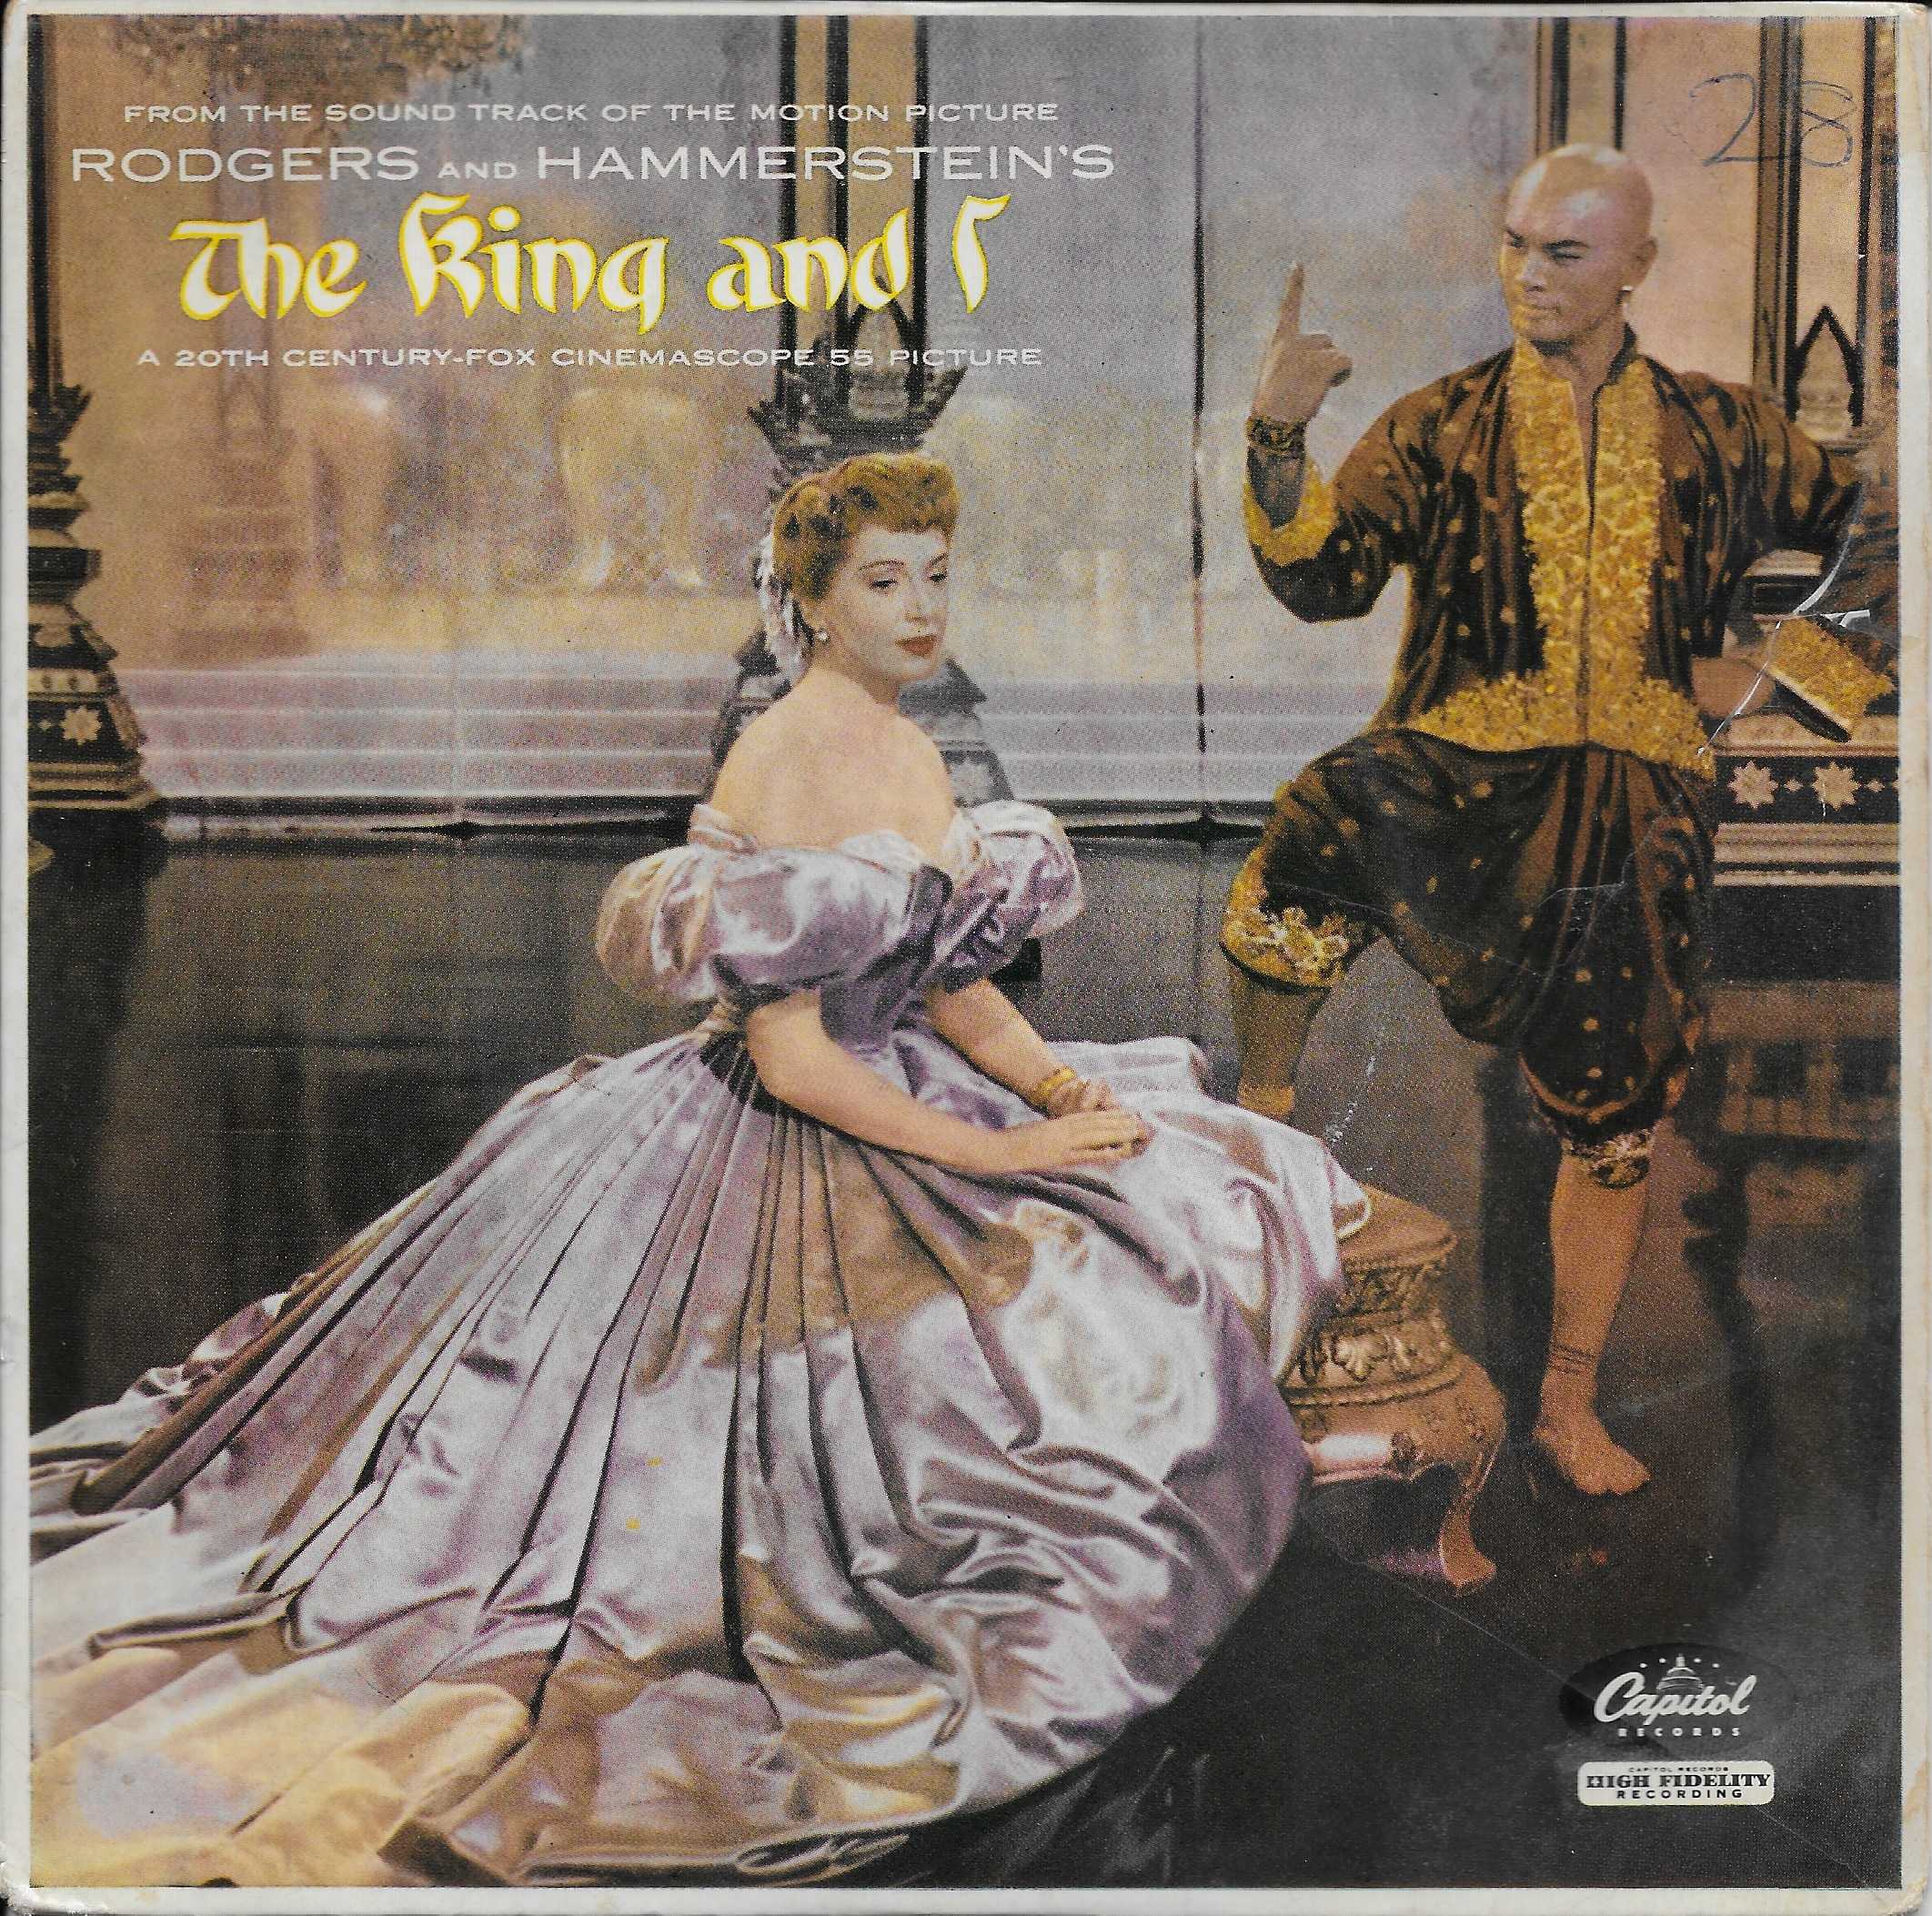 Picture of The King and I 2 by artist Rodgers / Hammerstein II from ITV, Channel 4 and Channel 5 singles library